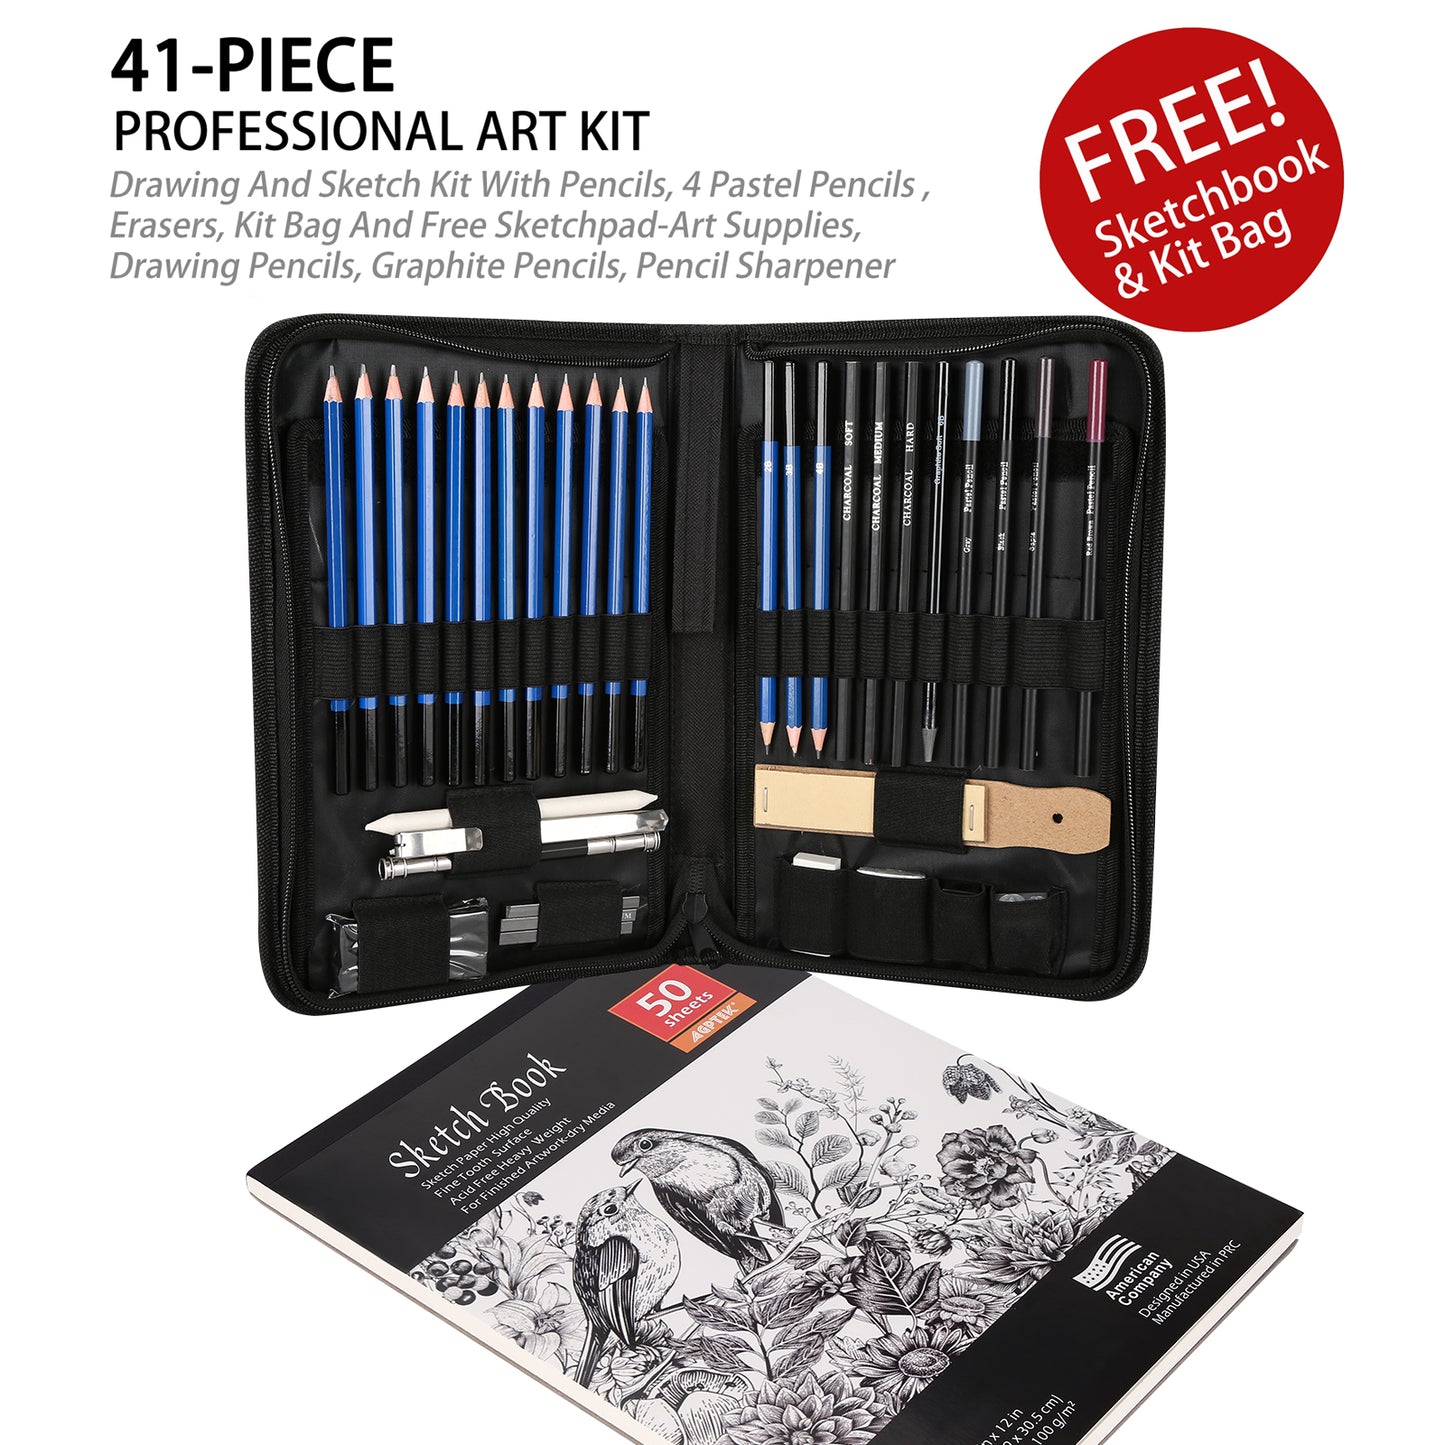  Drawing Set for Kids Ages 8-12 - Drawing Kit with 41pcs of  Drawing Supplies for Kids, Teens, and Adults - Sketchbook 9”x12” 100 Pages  and Portable Drawing Pencil Case Case